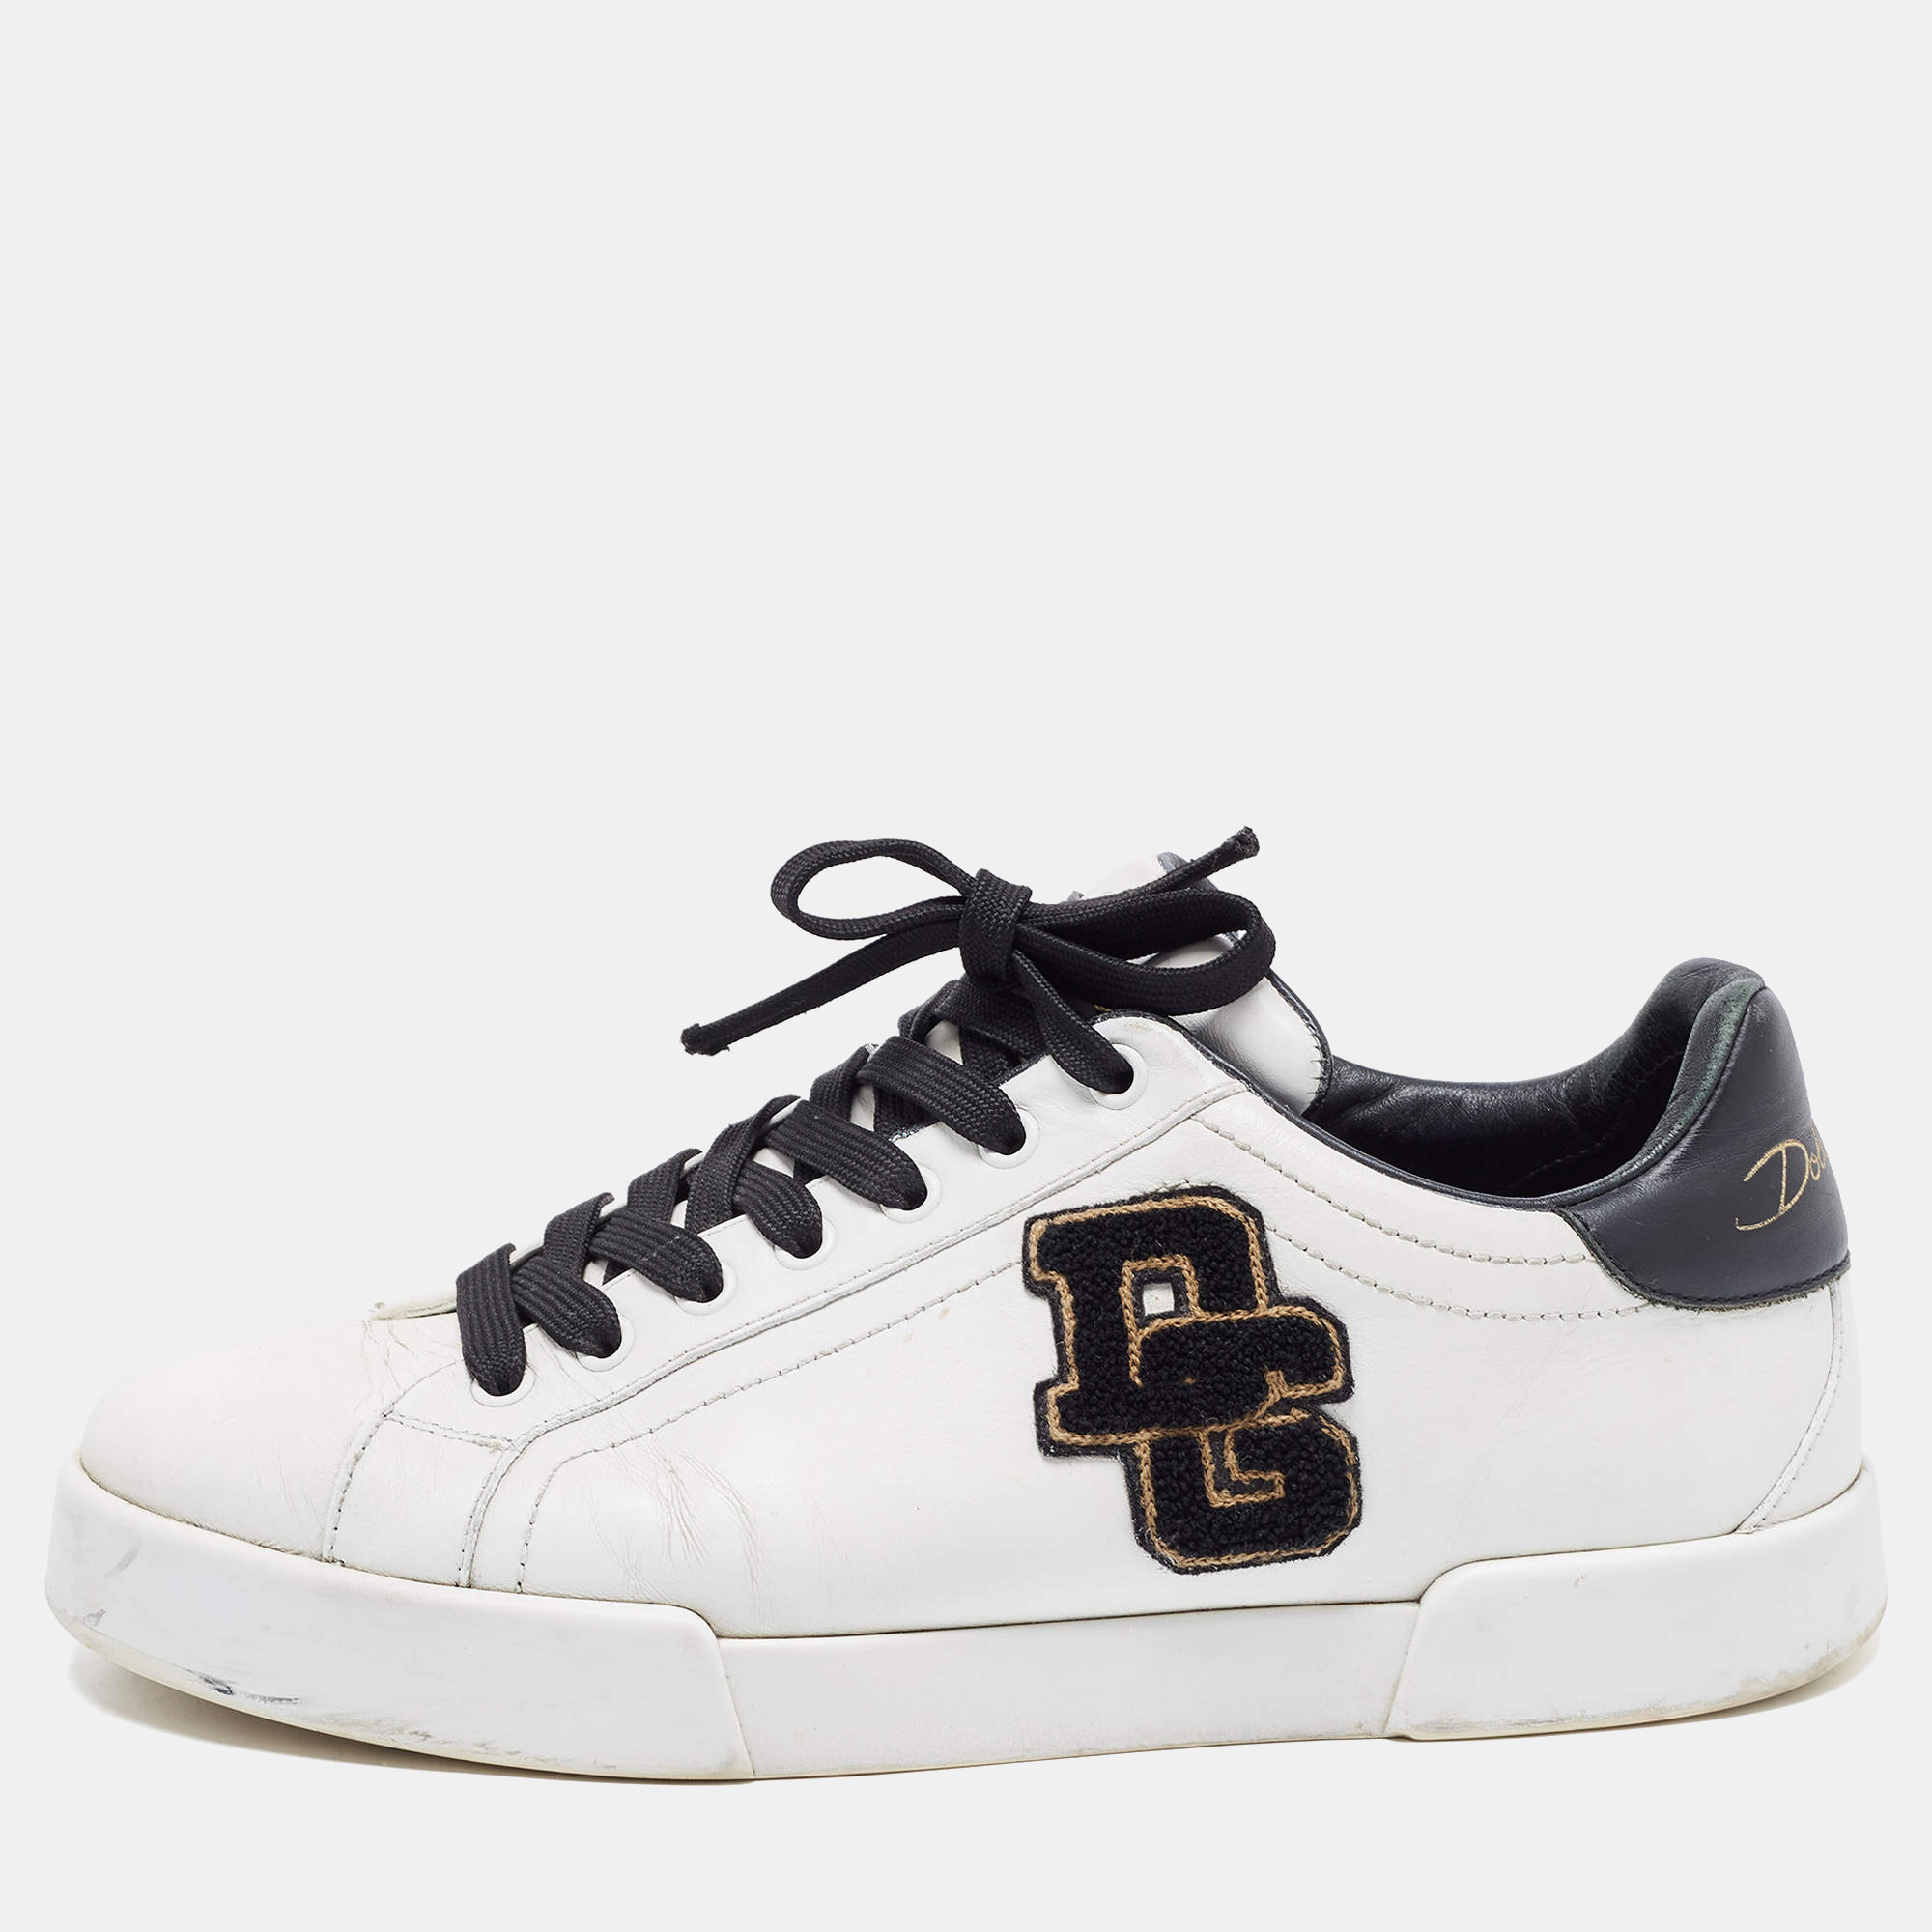 These Portofino sneakers from Dolce and Gabbana will add a sporty element to your casual attire. They are created using white leather on the exterior and show lace up details on the vamps. They have leather lined insoles and rubber soles. Experience comfort as you wear these trendy sneakers.